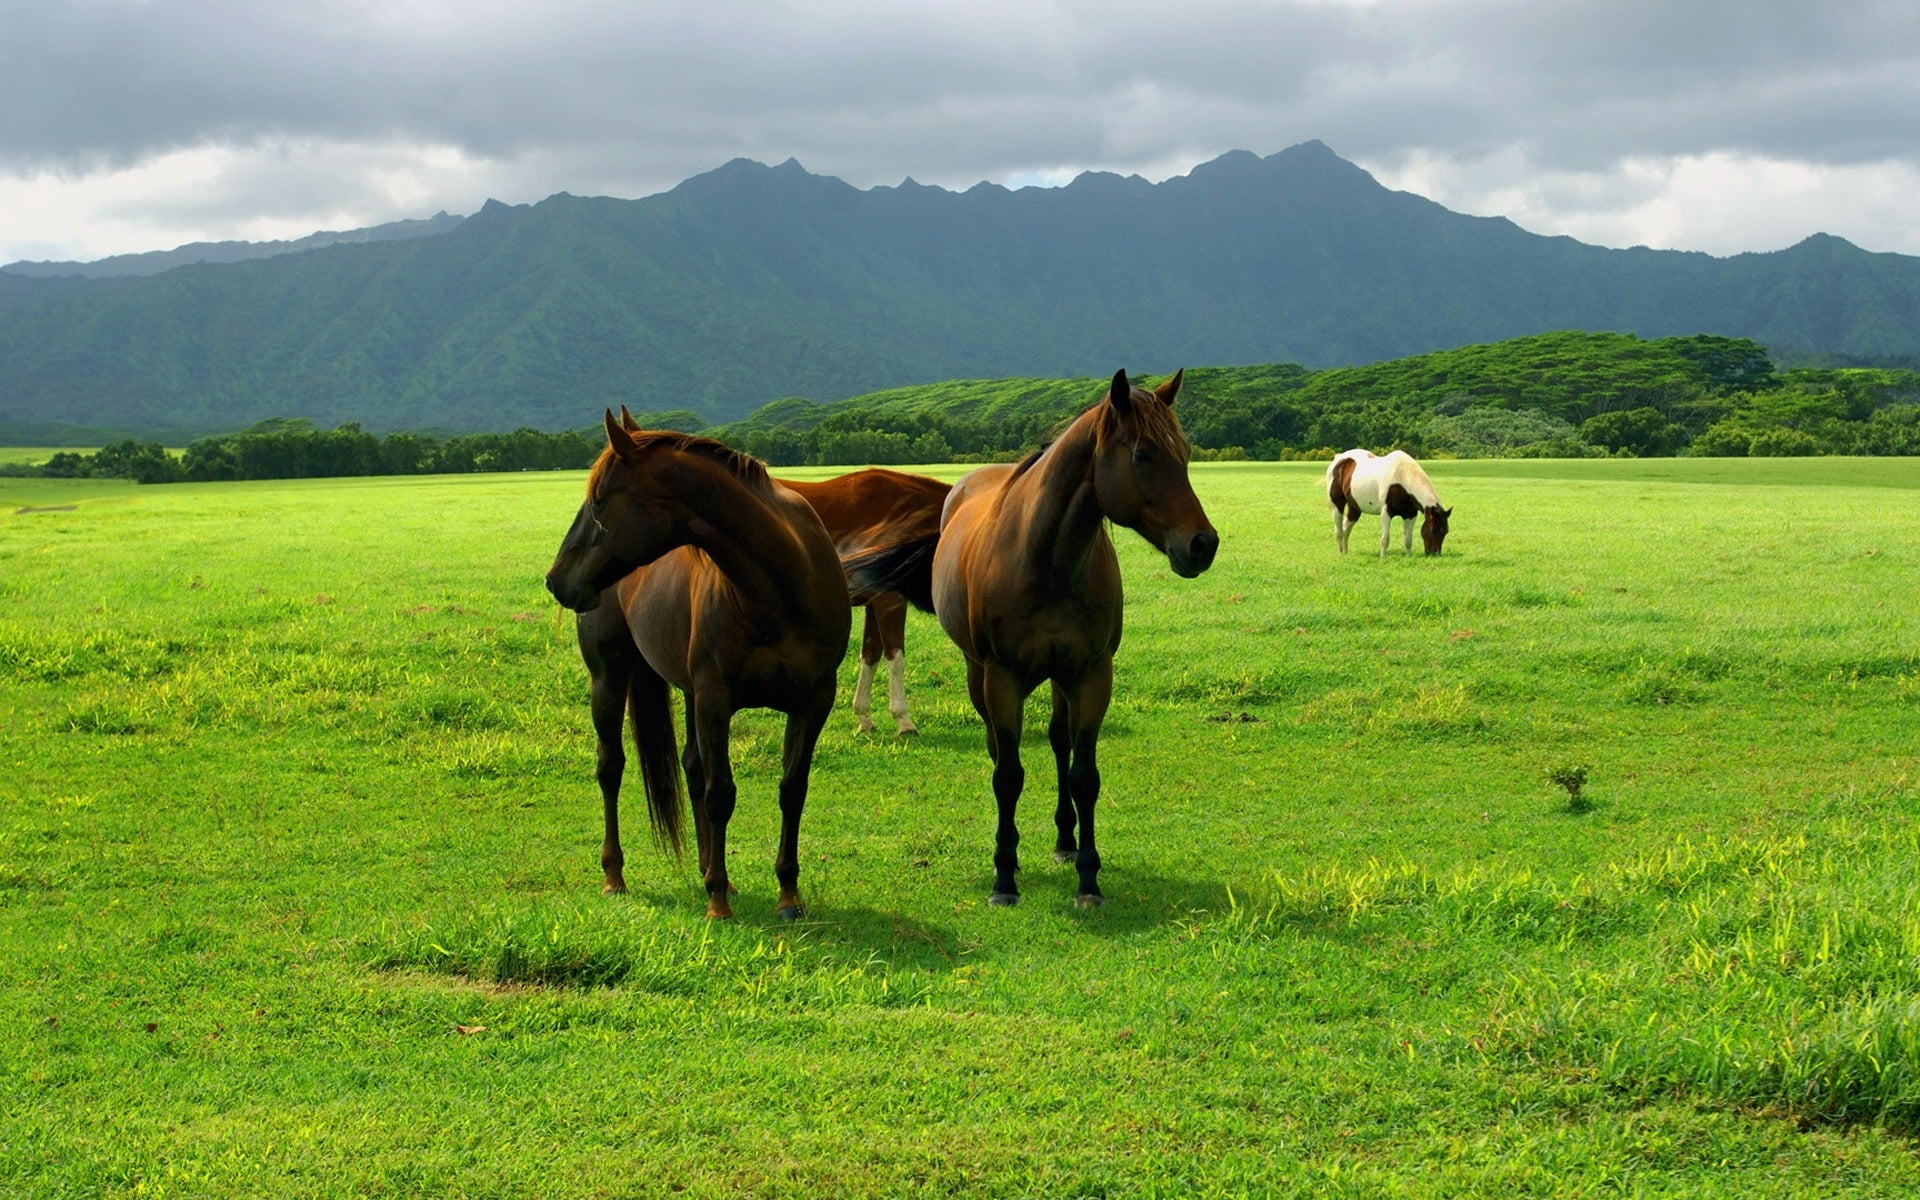 three horse on green grass field during cloudy sky